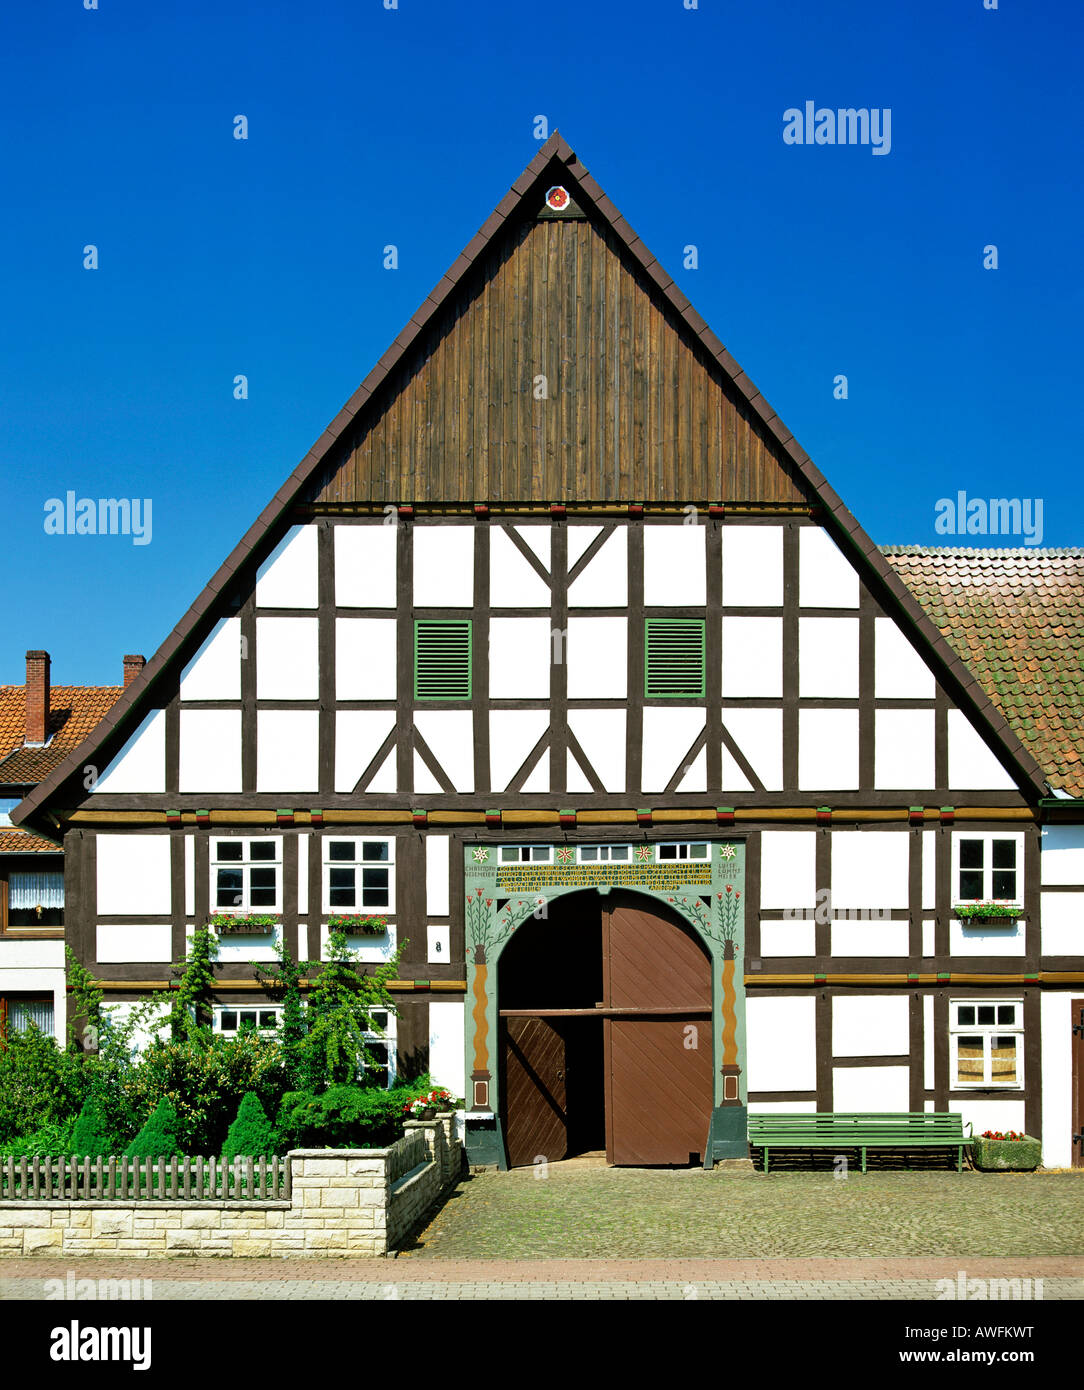 Fachwerk-style house with inscribed archway, North Rhine-Westphalia, Germany, Europe Stock Photo